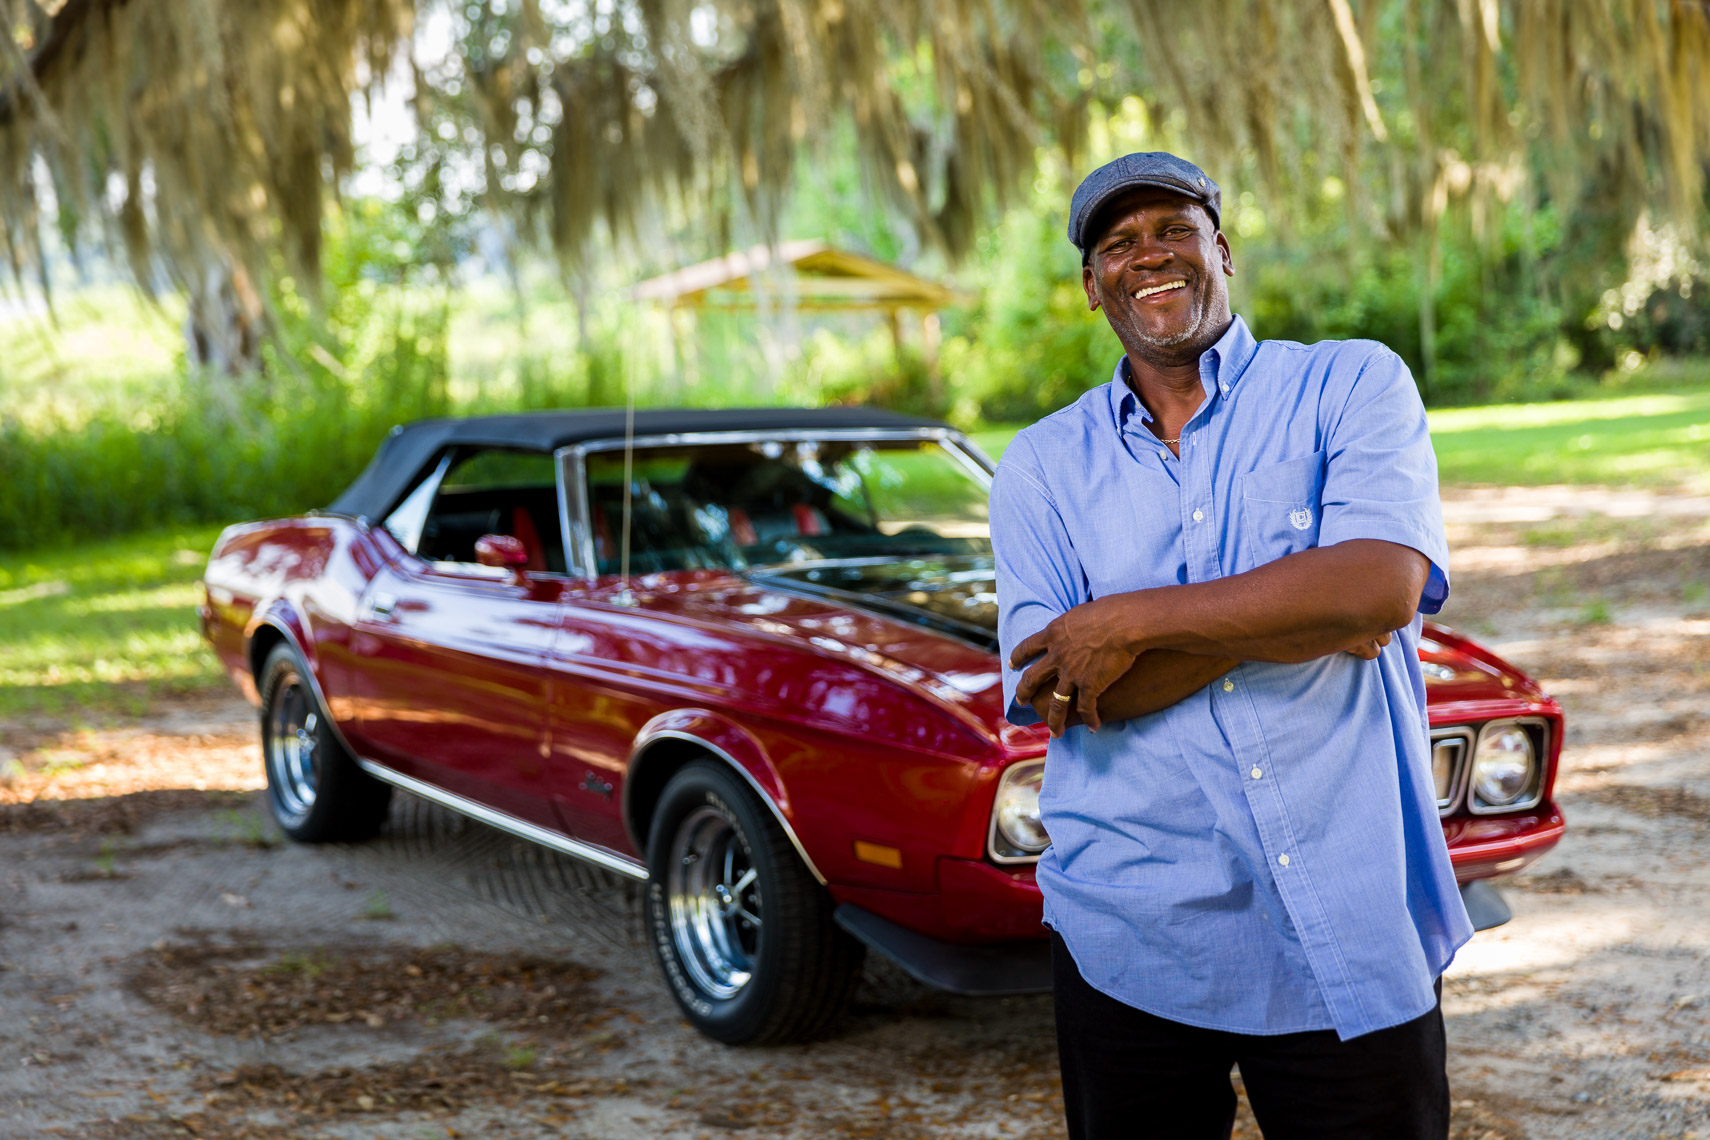 Portrait of a car Owner and his Red 1973 Mustang Convertible